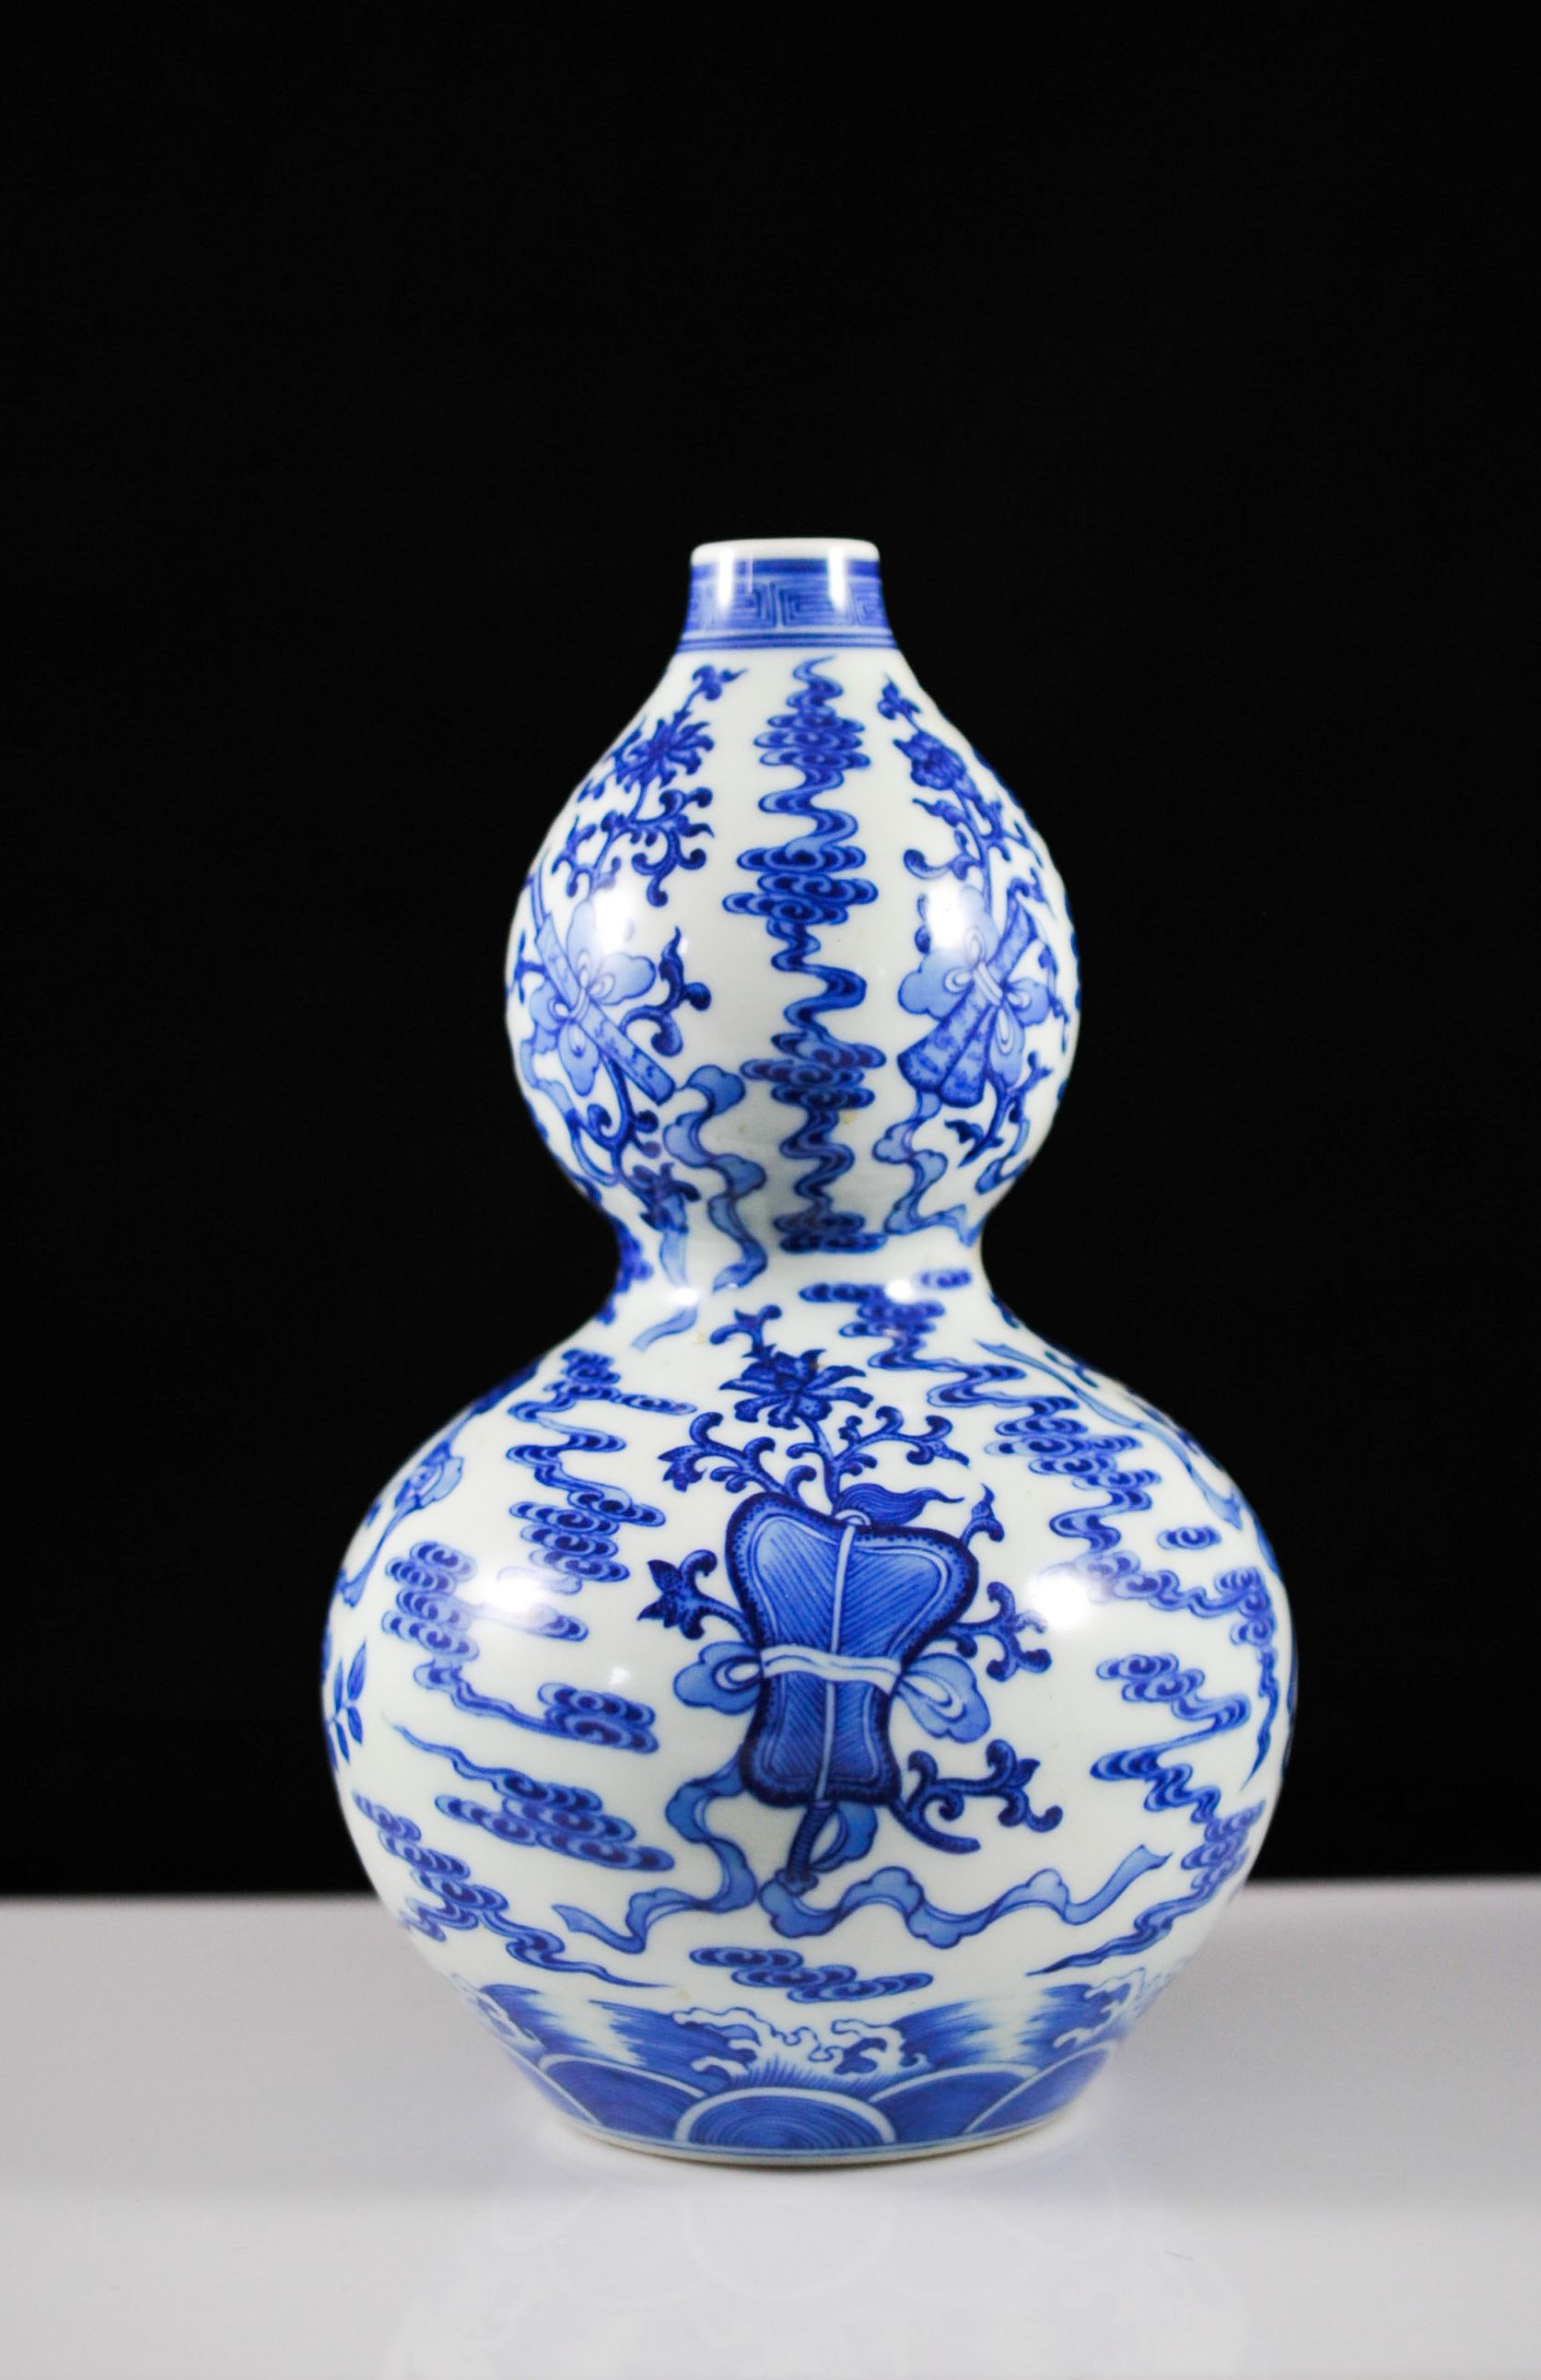 14 attractive Cobalt Blue Flower Vase 2024 free download cobalt blue flower vase of description double bulb blue and white wares chinese vase white pertaining to description double bulb blue and white wares chinese vase white base color with cobal